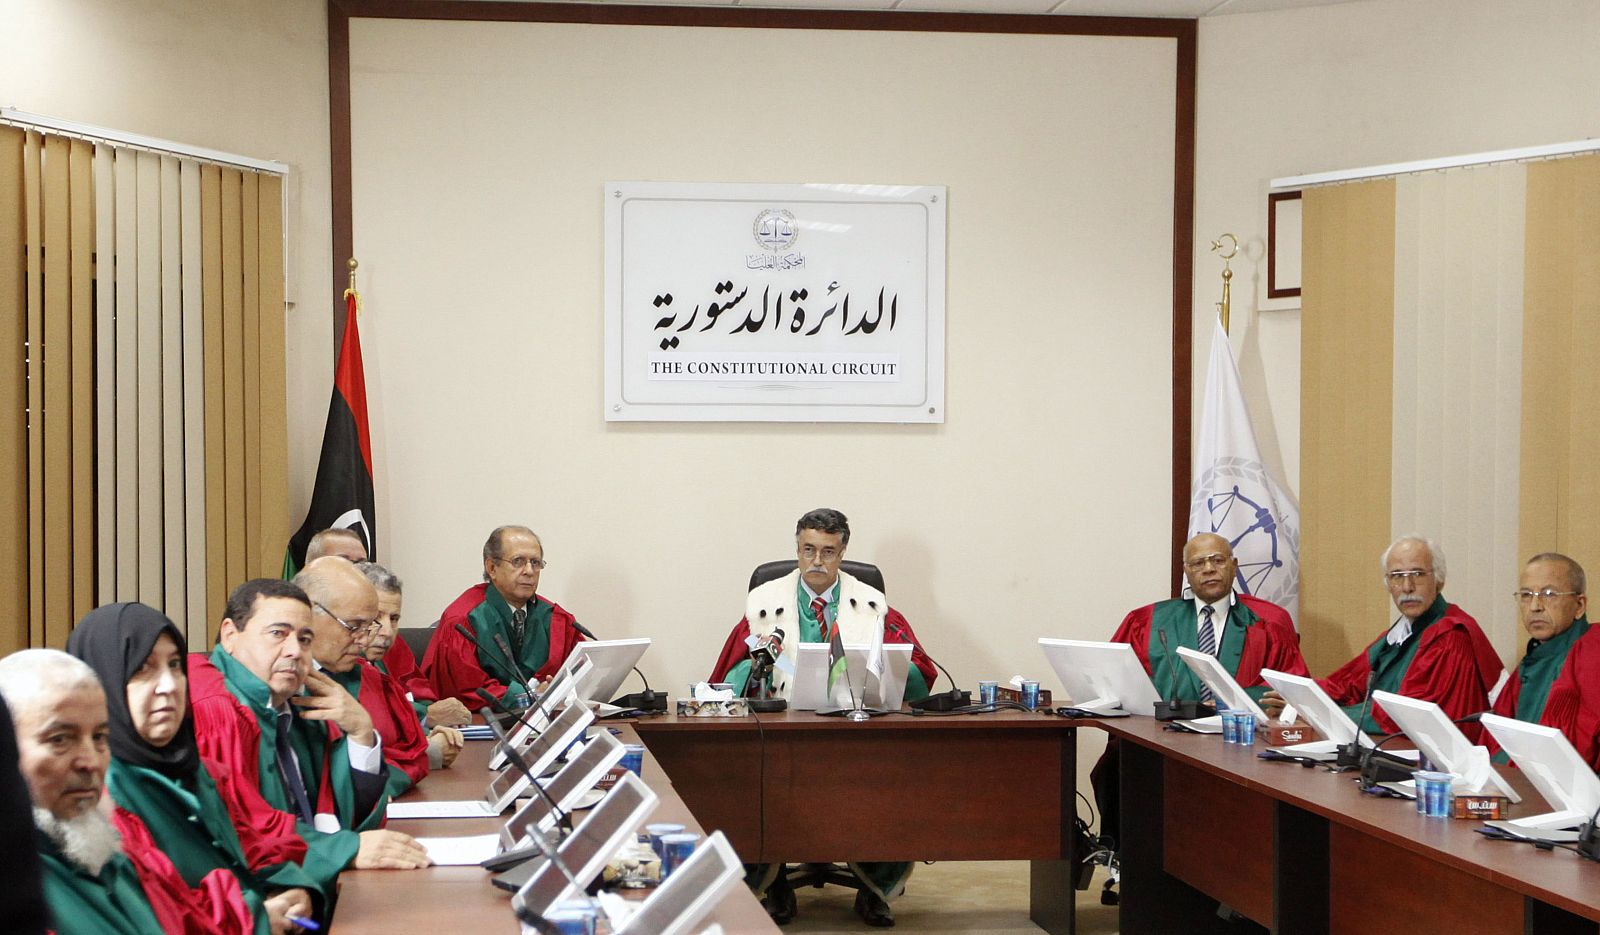 Judge Kamal Bashir Dahan, head of Libya's Supreme Court, meets with members of the Constitutional Chamber in Tripol